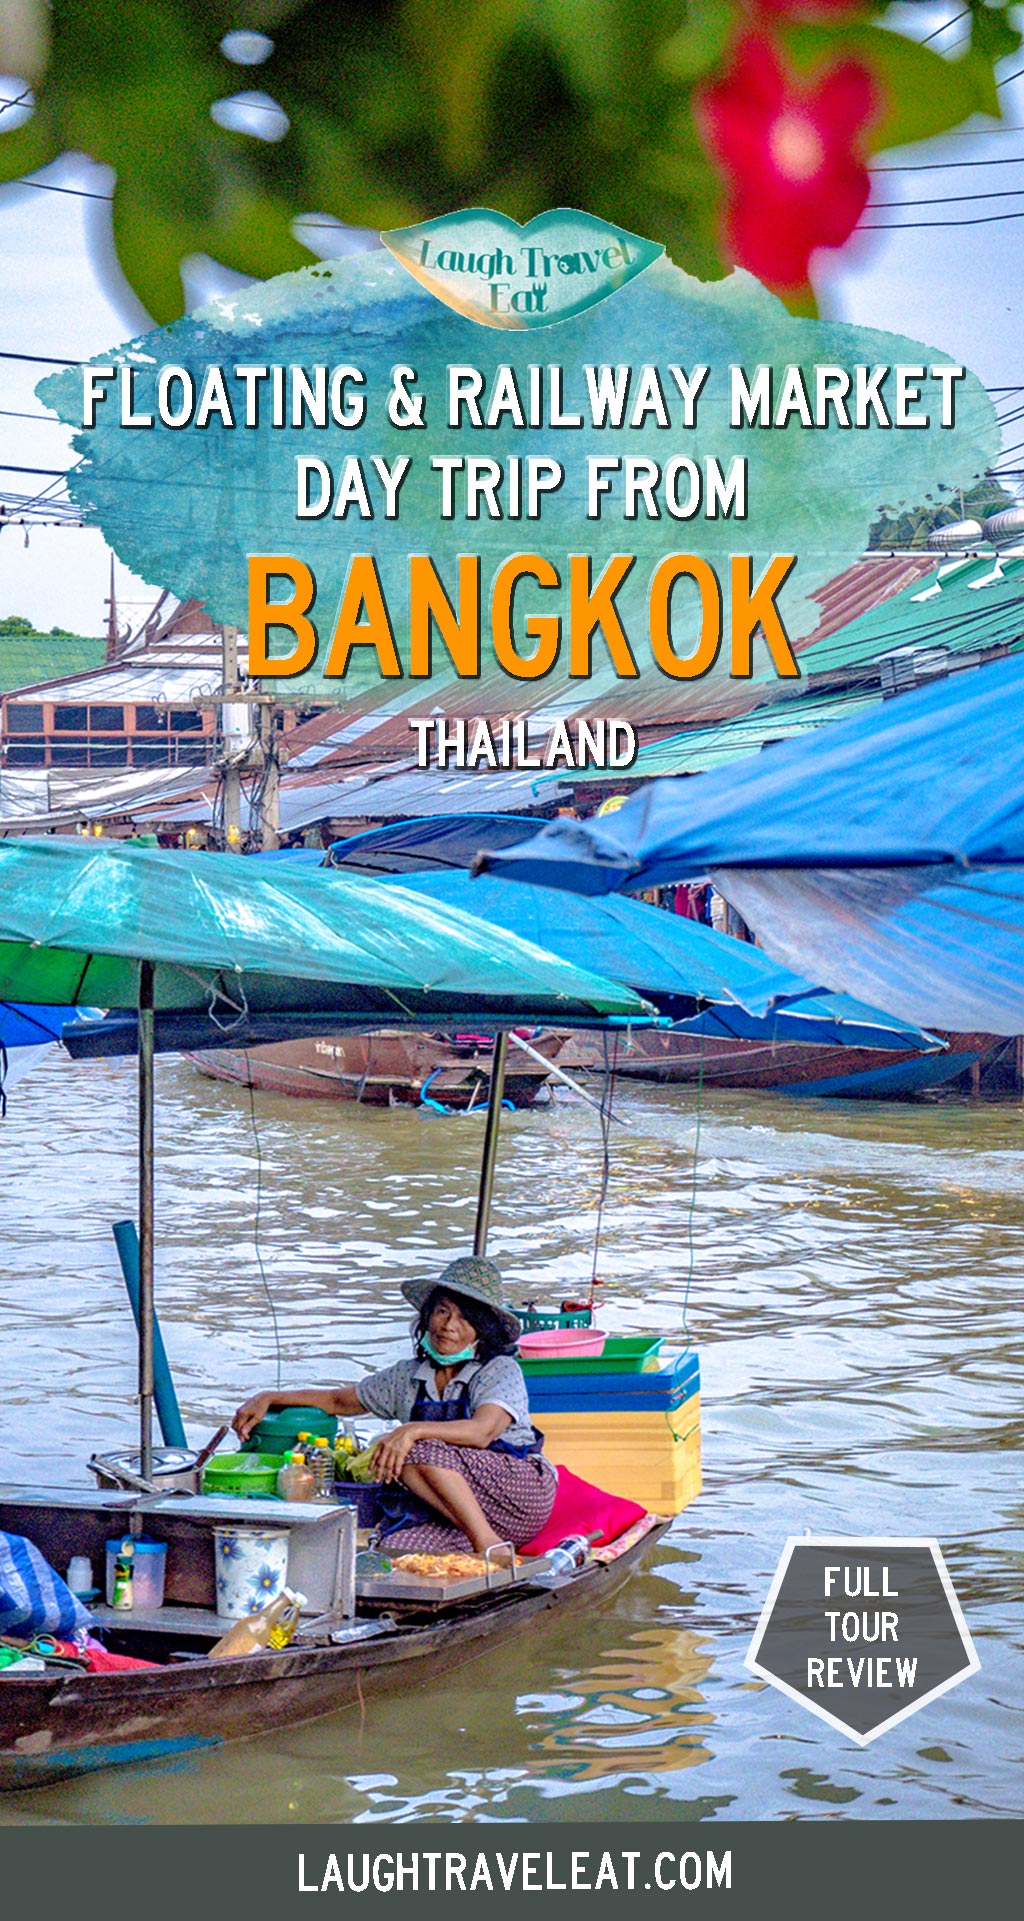 One of the most popular day trips from Bangkok is the floating market and the railway market. While there’s only one railway market - the Maeklong Railway Market. Combine it with a visit to Amphawa Floating Market on a day trip and here's what a tour looks like: #bangkok #daytrip #floatingmarket #railwaymarket